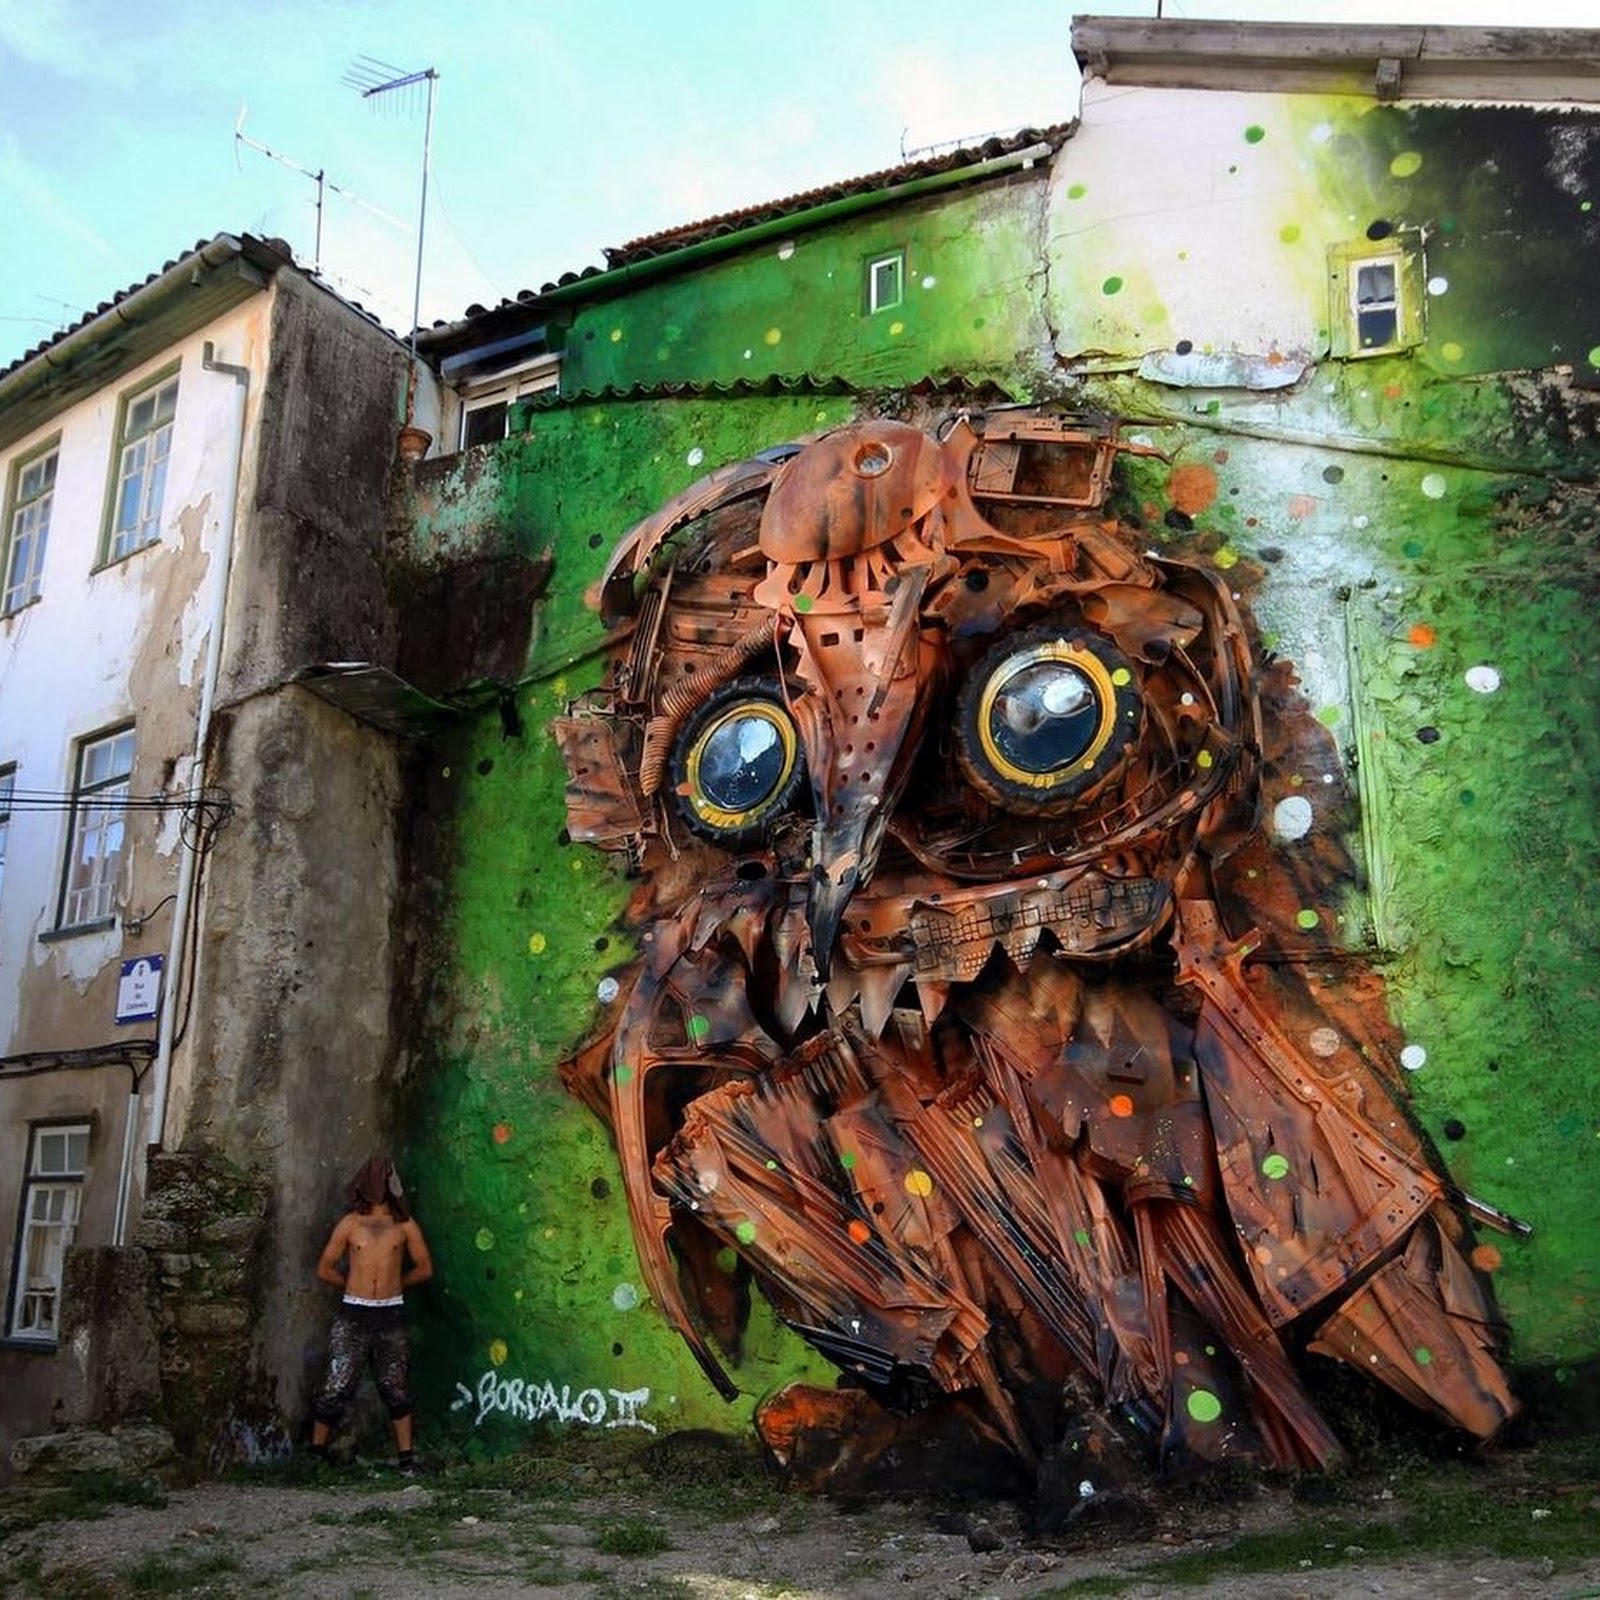 Murals From Trash by Bordalo II